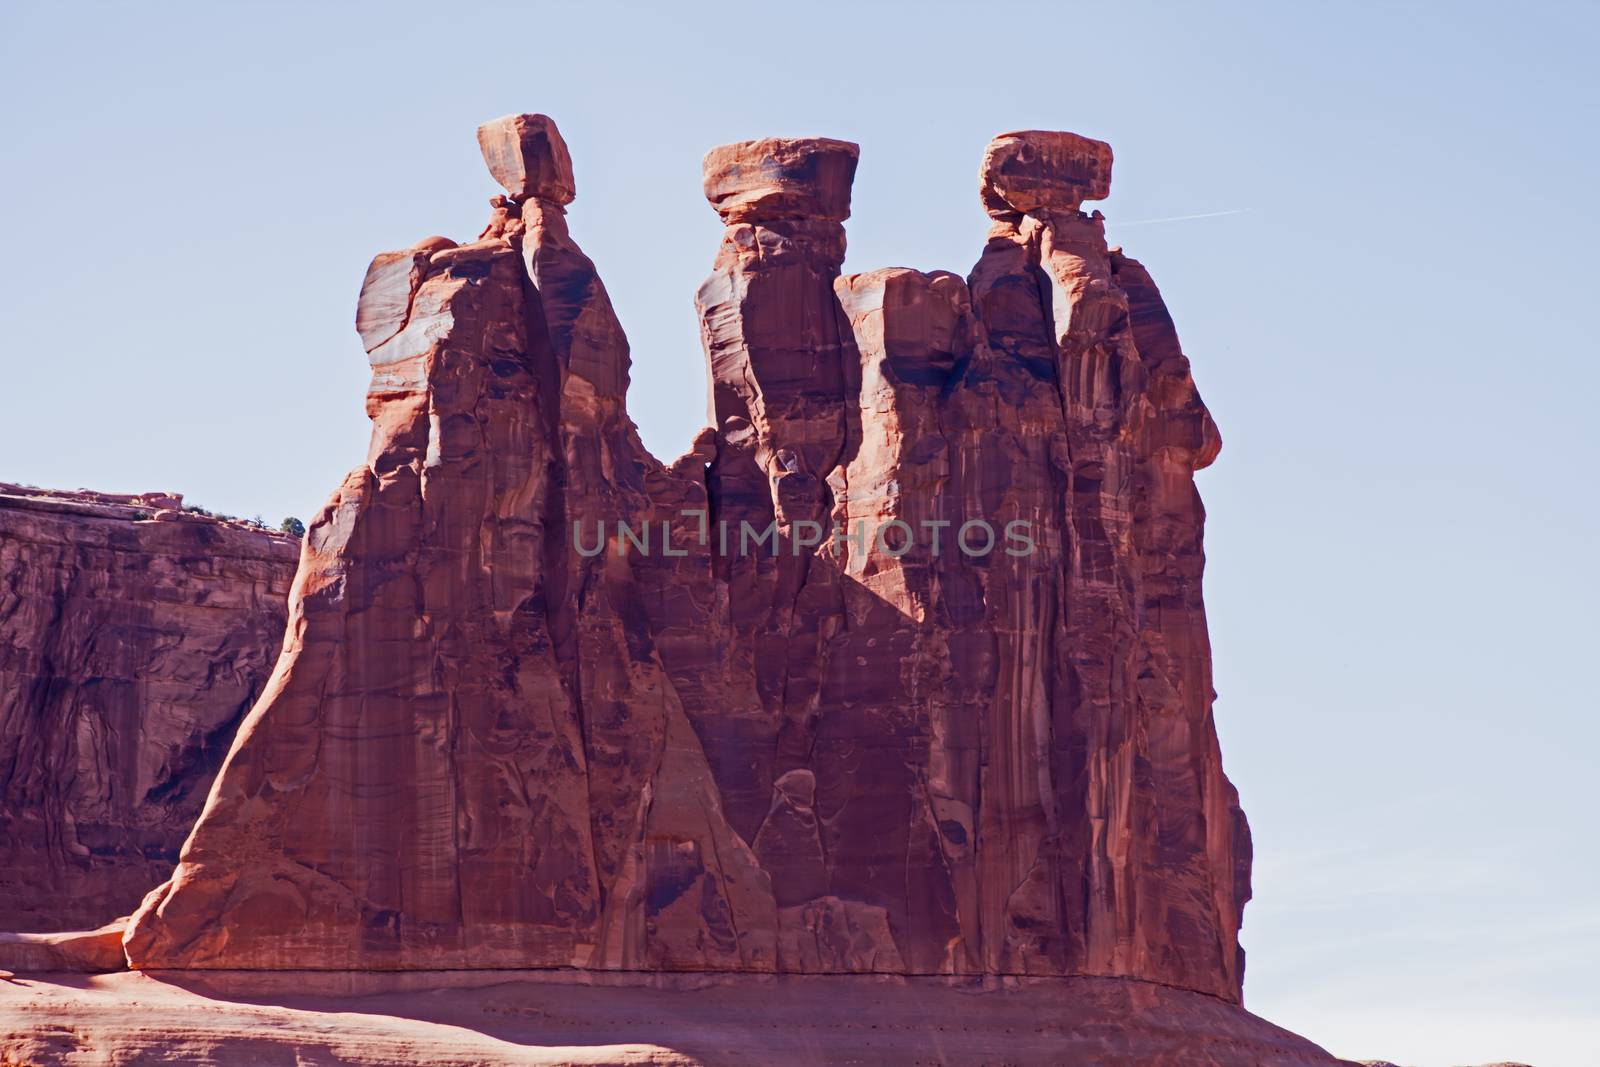 The Three Gossips Formation in Arches National Park, Utah.